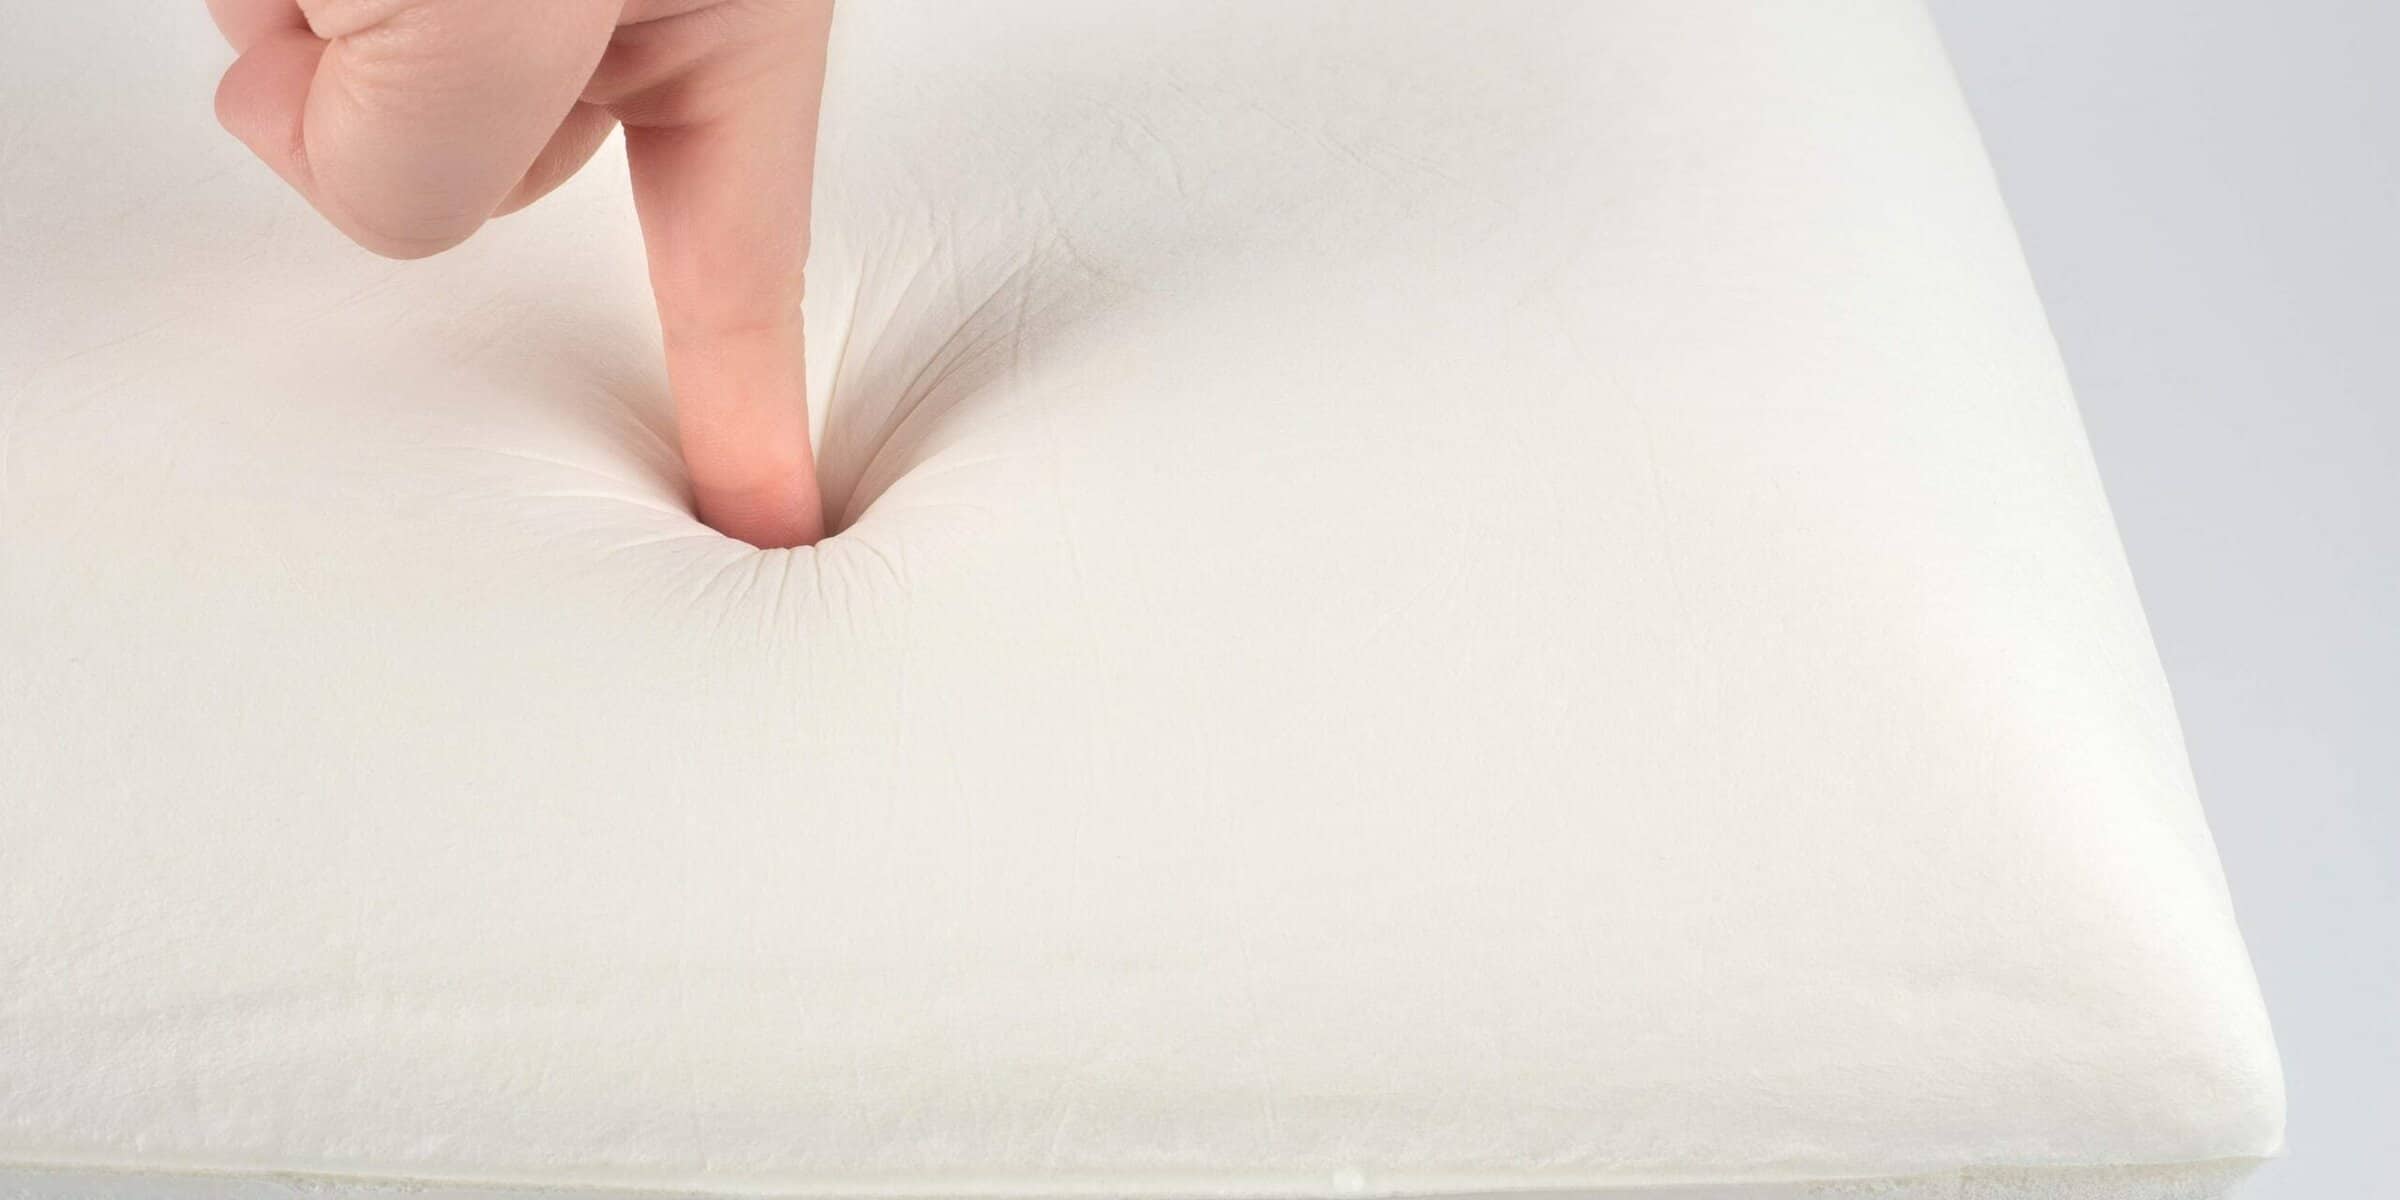 How to Wash a Shredded Memory Foam Pillow (3 Super Simple Steps)